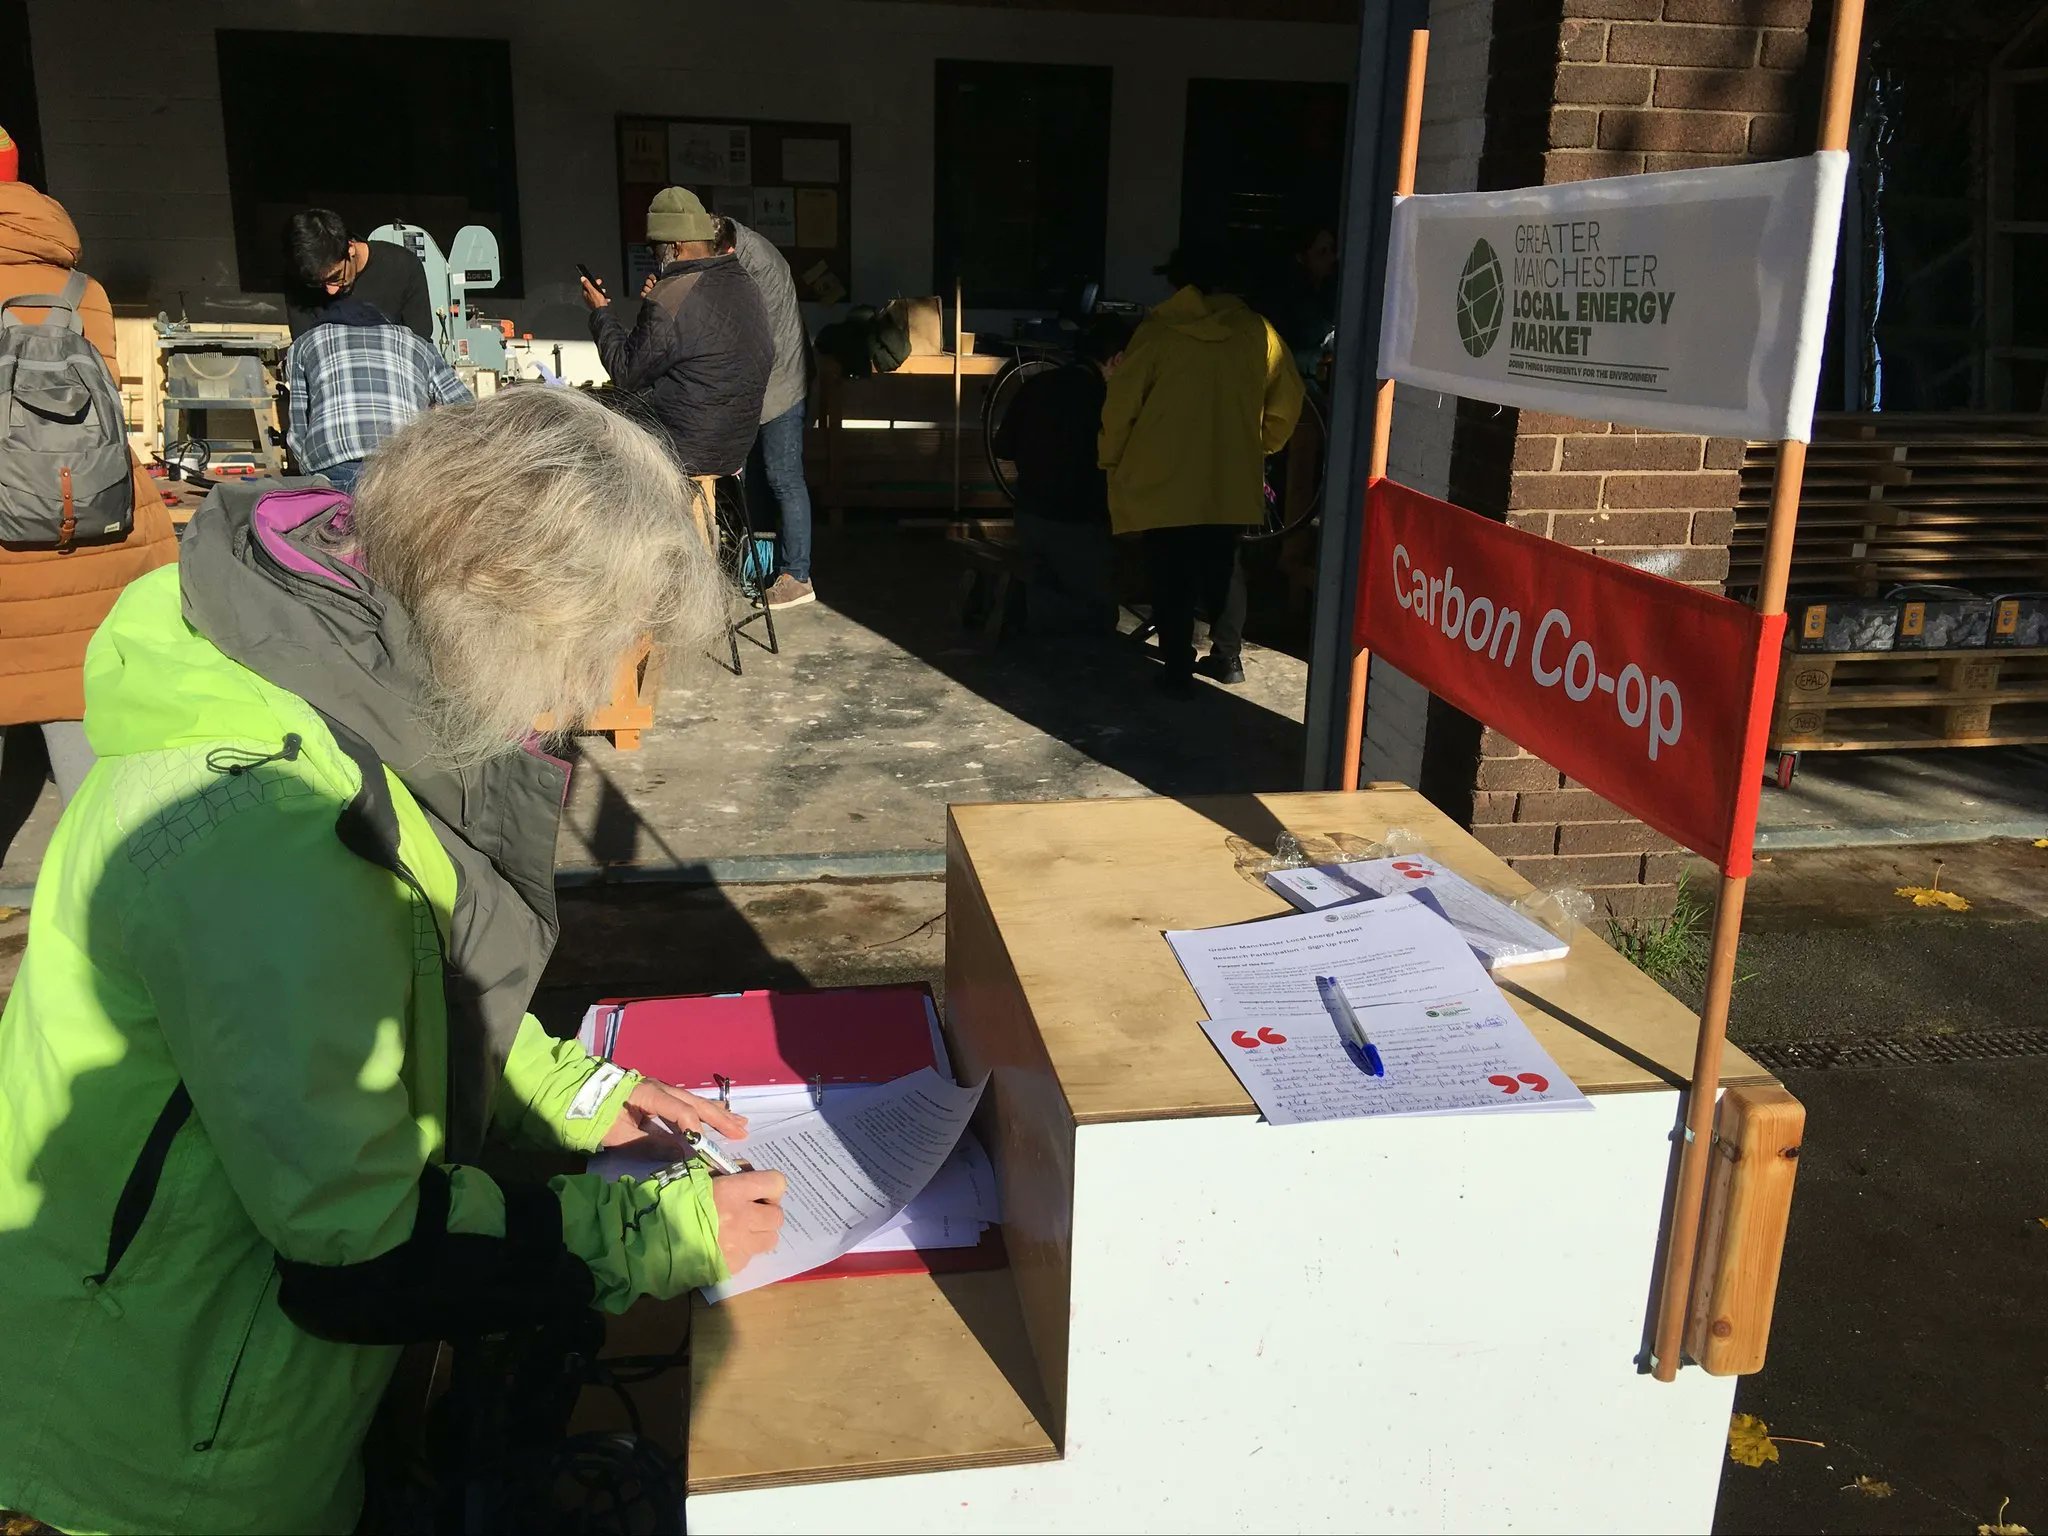 A woman signing up for a the Greater Manchester Local Energy Market Citizen's Jury on a Carbon Co-op stall